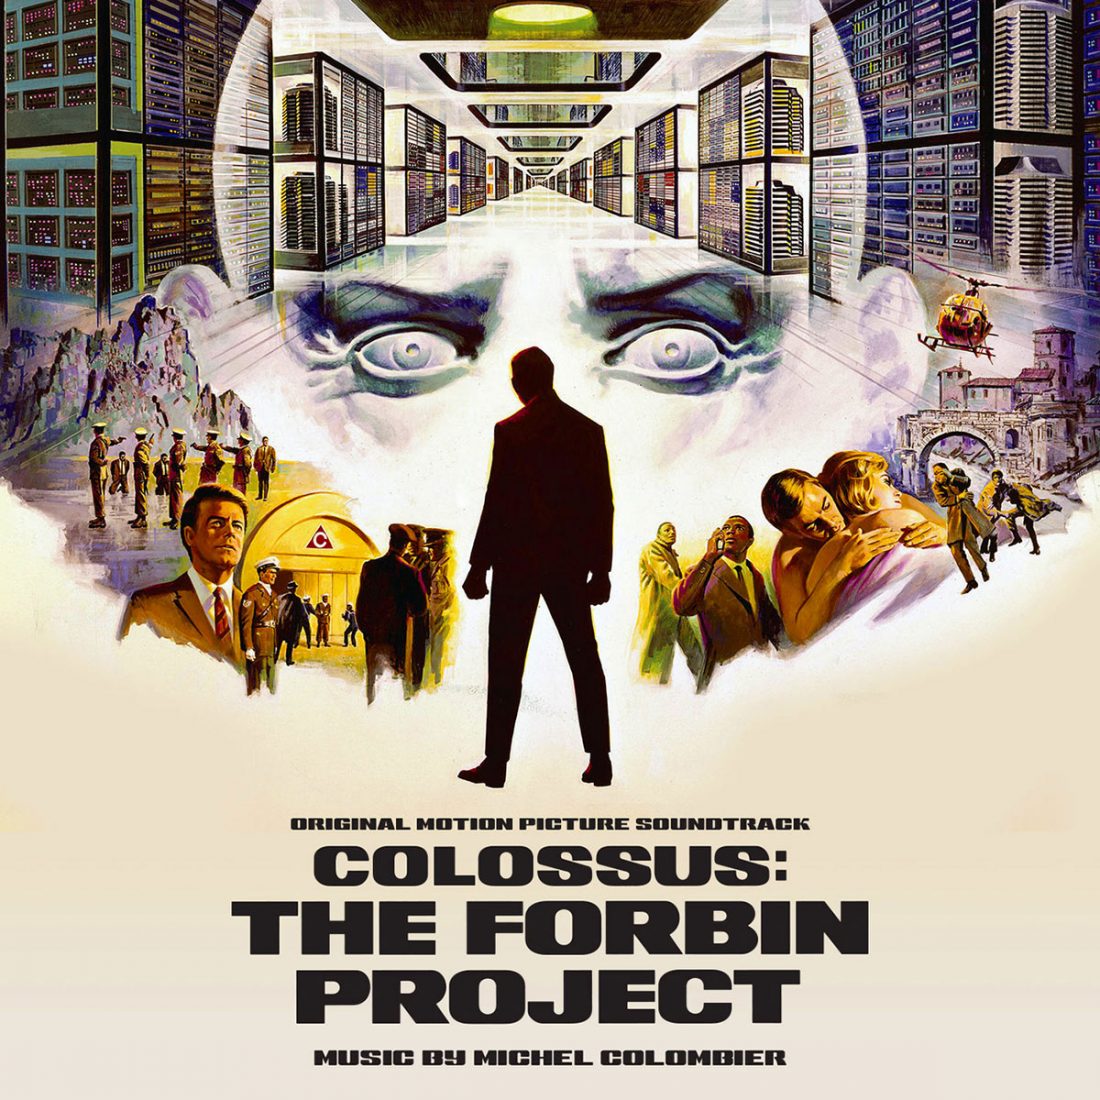 Movie Poster of Colossus: The Forbin Project